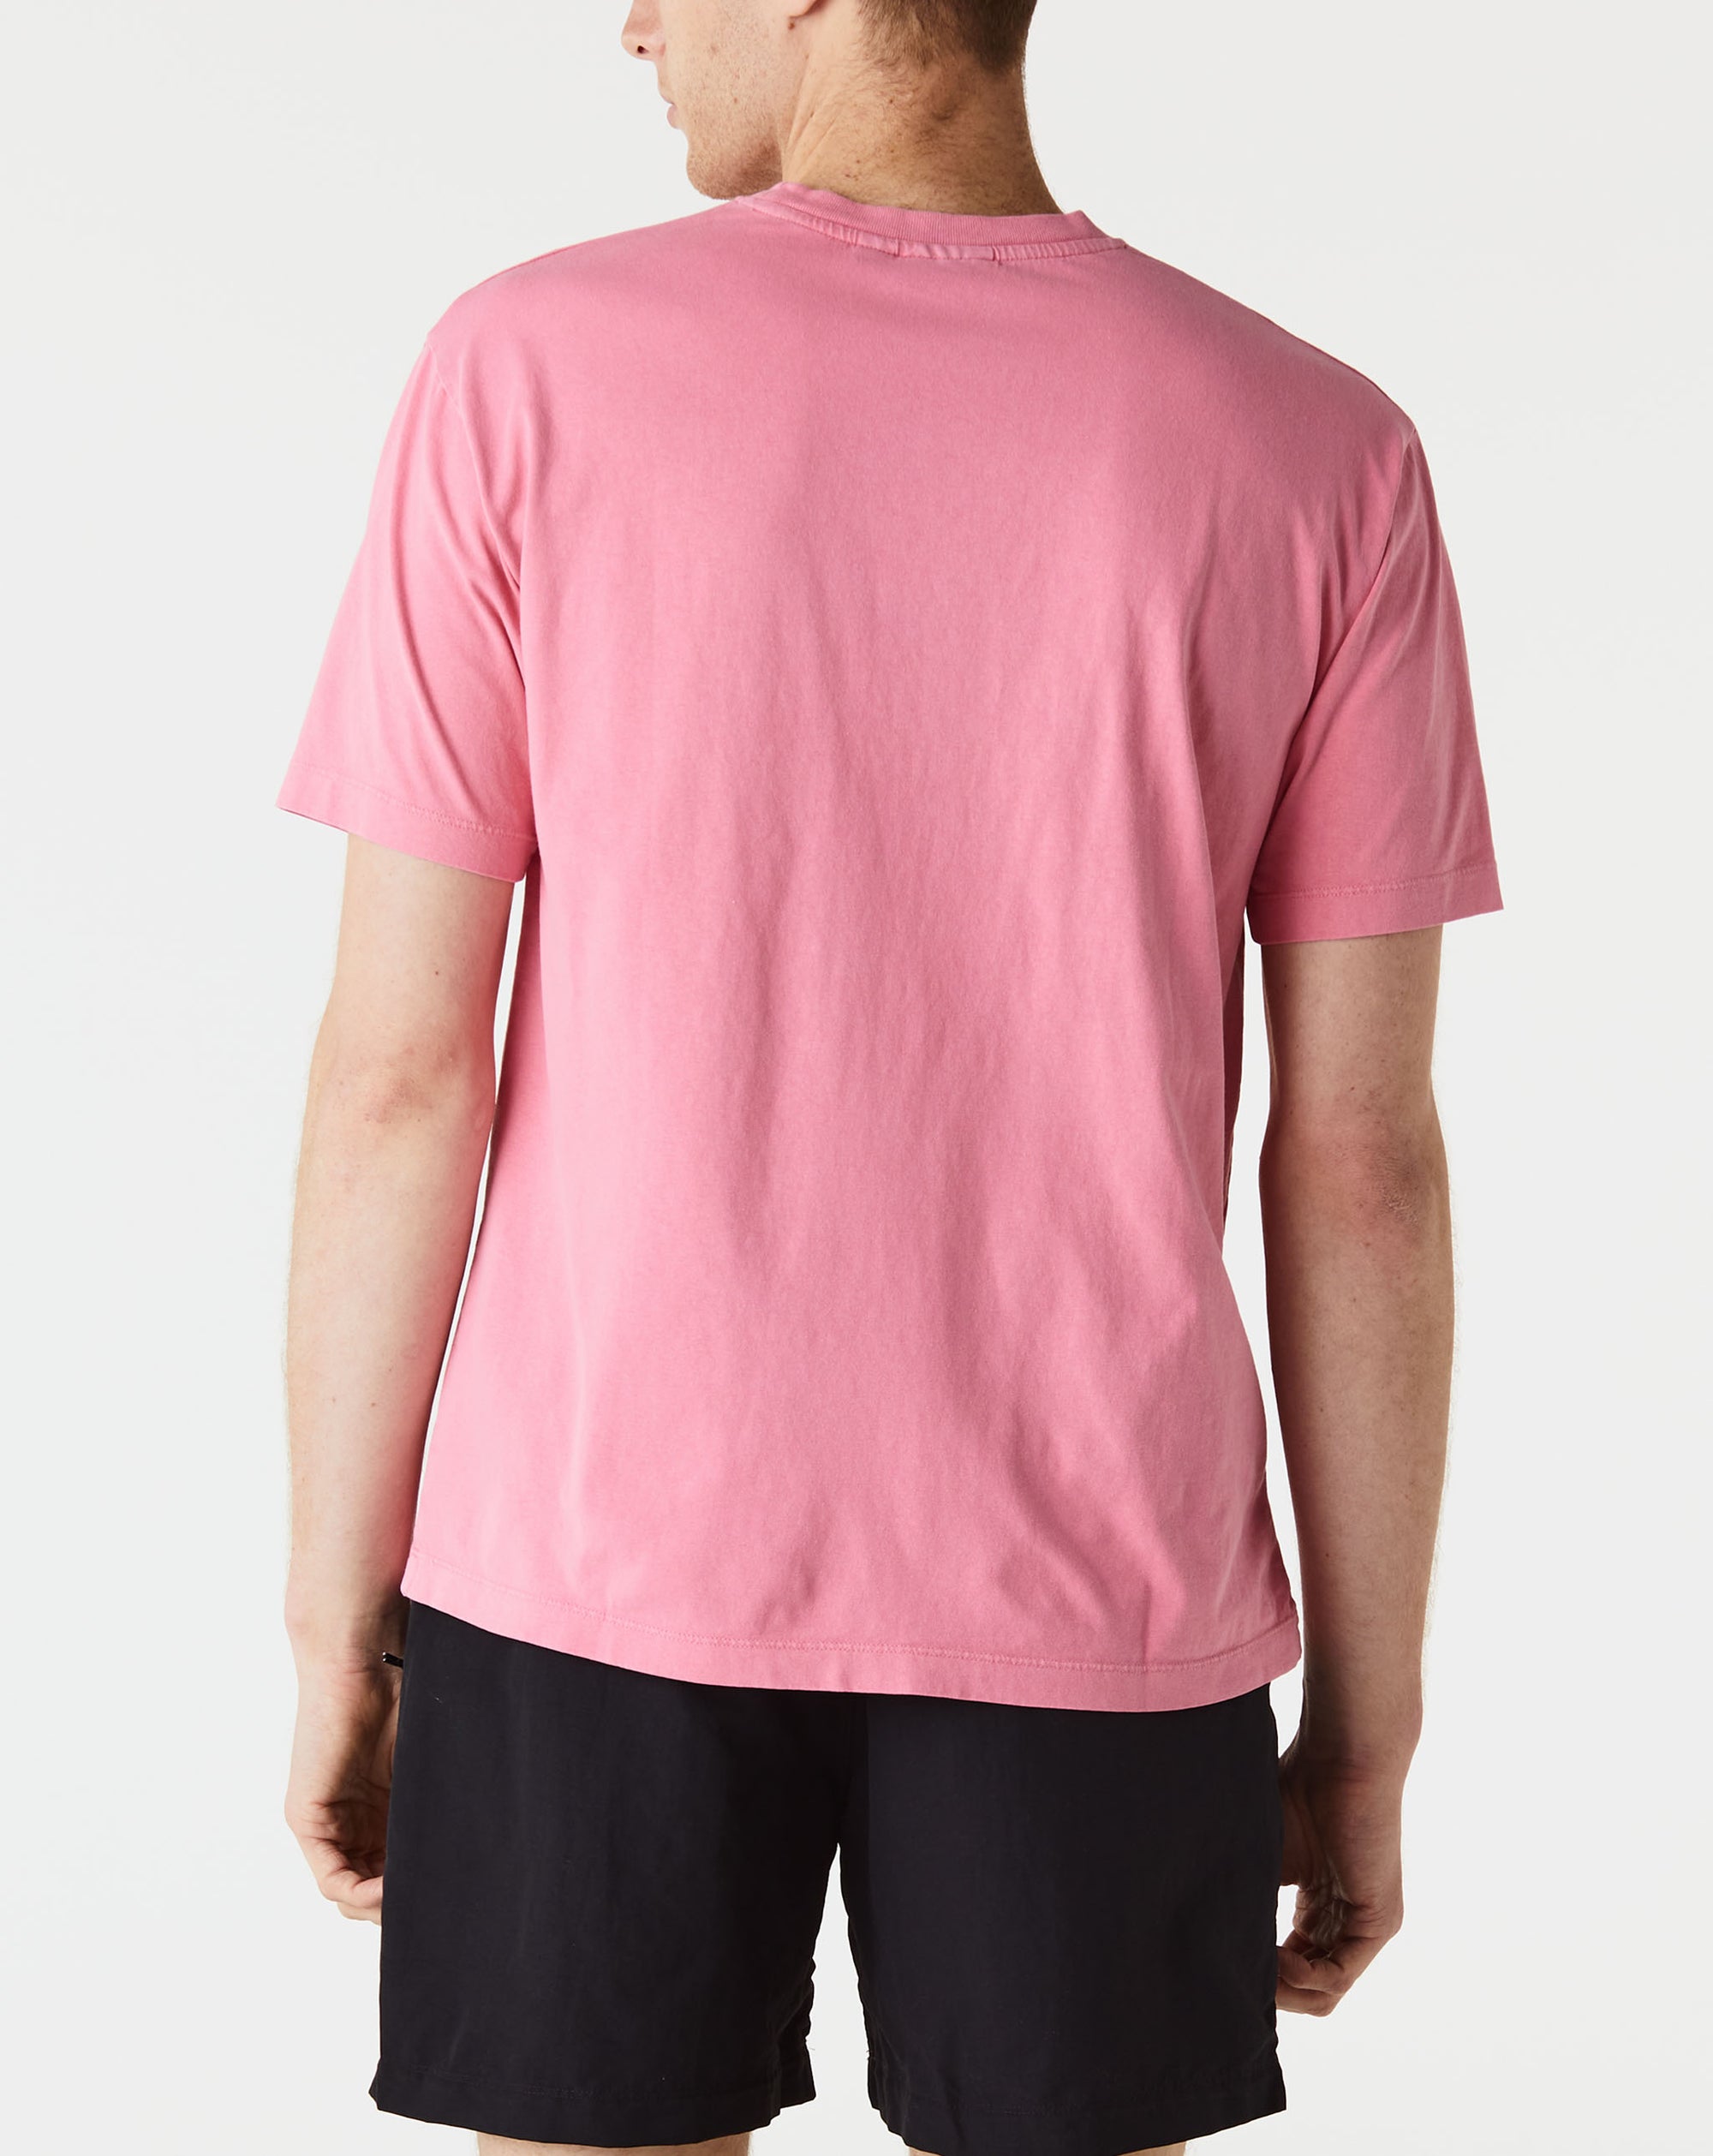 by Parra Classic Logo T-Shirt - Rule of Next Apparel